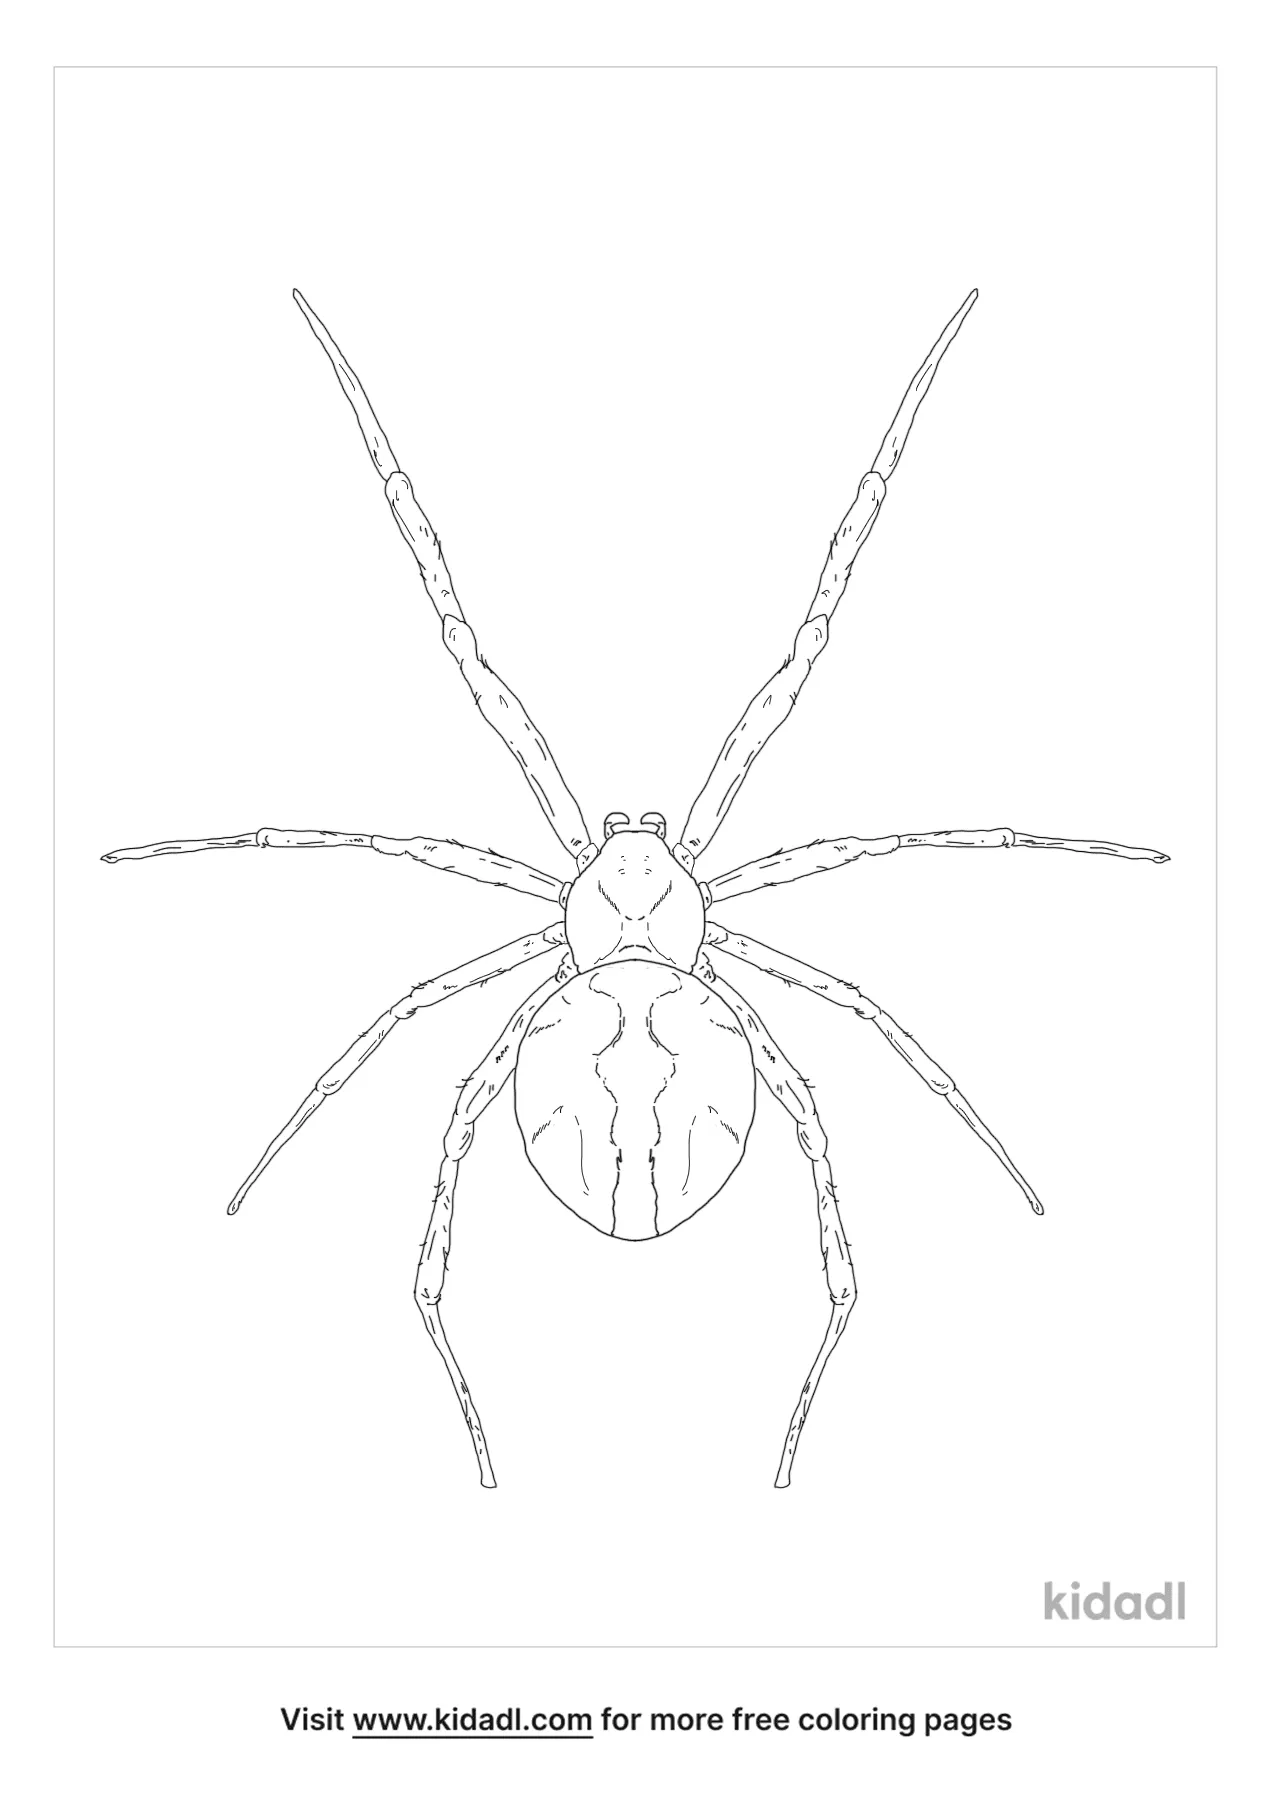 Katipo Spider Coloring Page